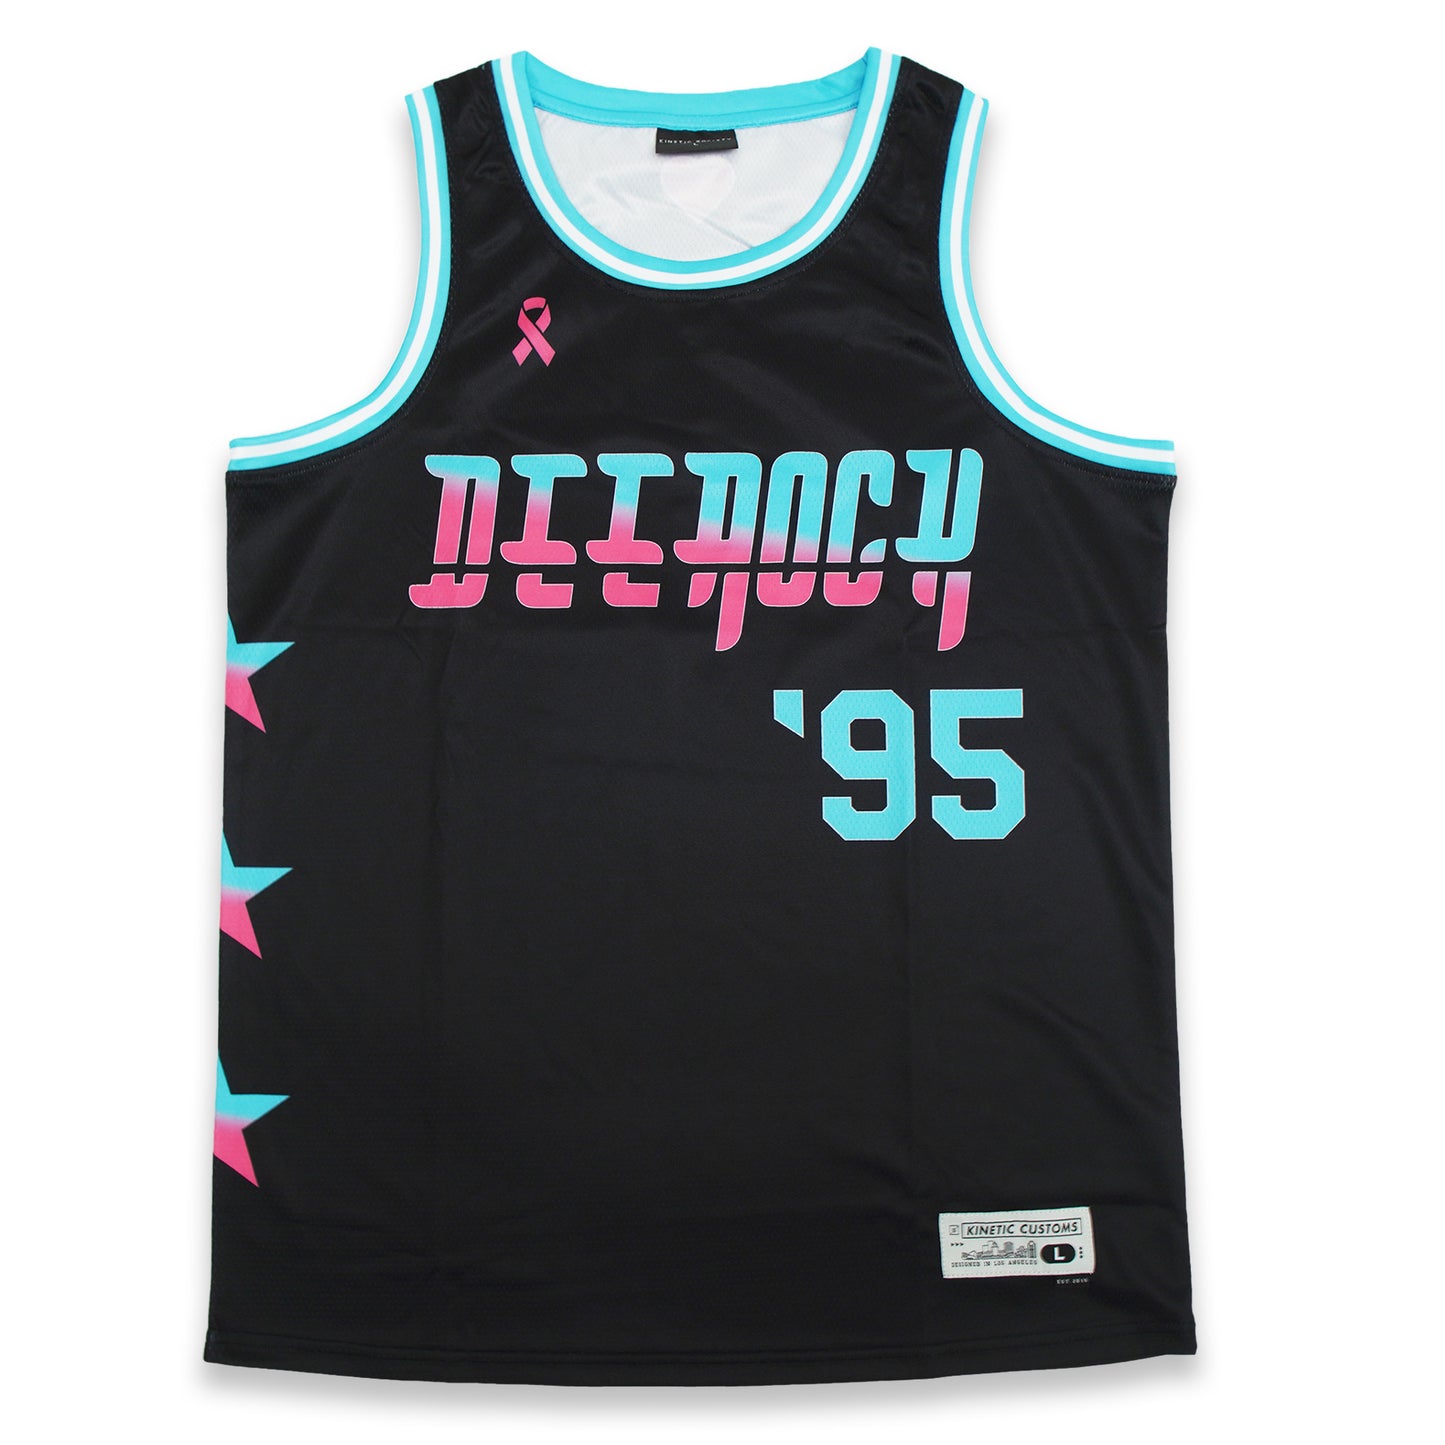 Deerock Basketball Jersey (Available in 2 colors)